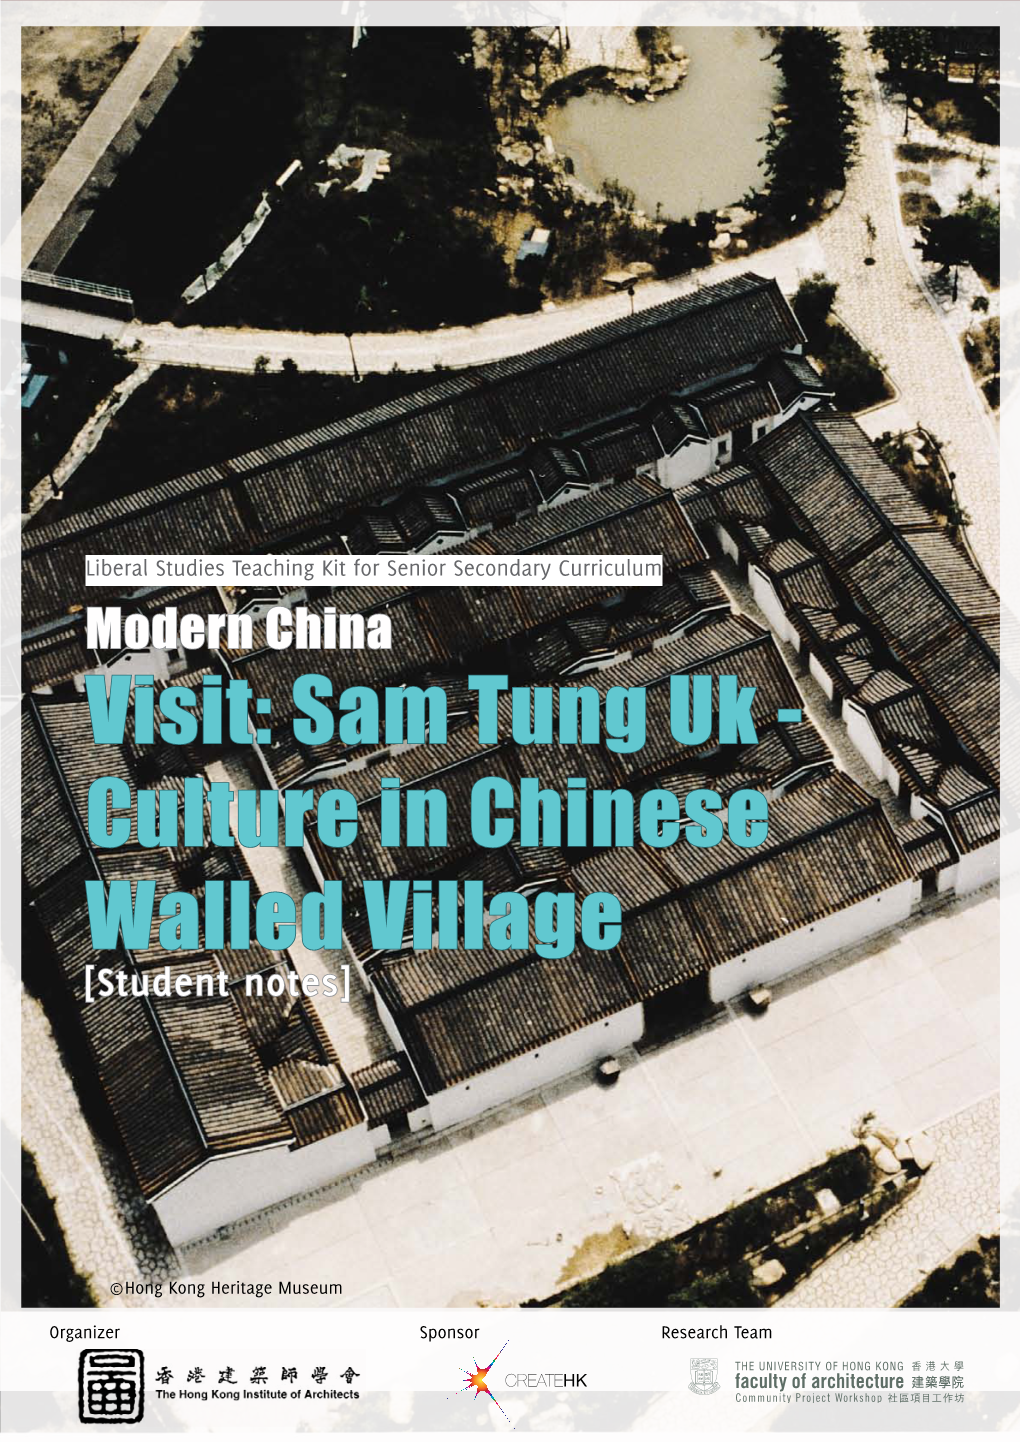 Visit: Sam Tung Uk - Culture in Chinese Walled Village [Student Notes]